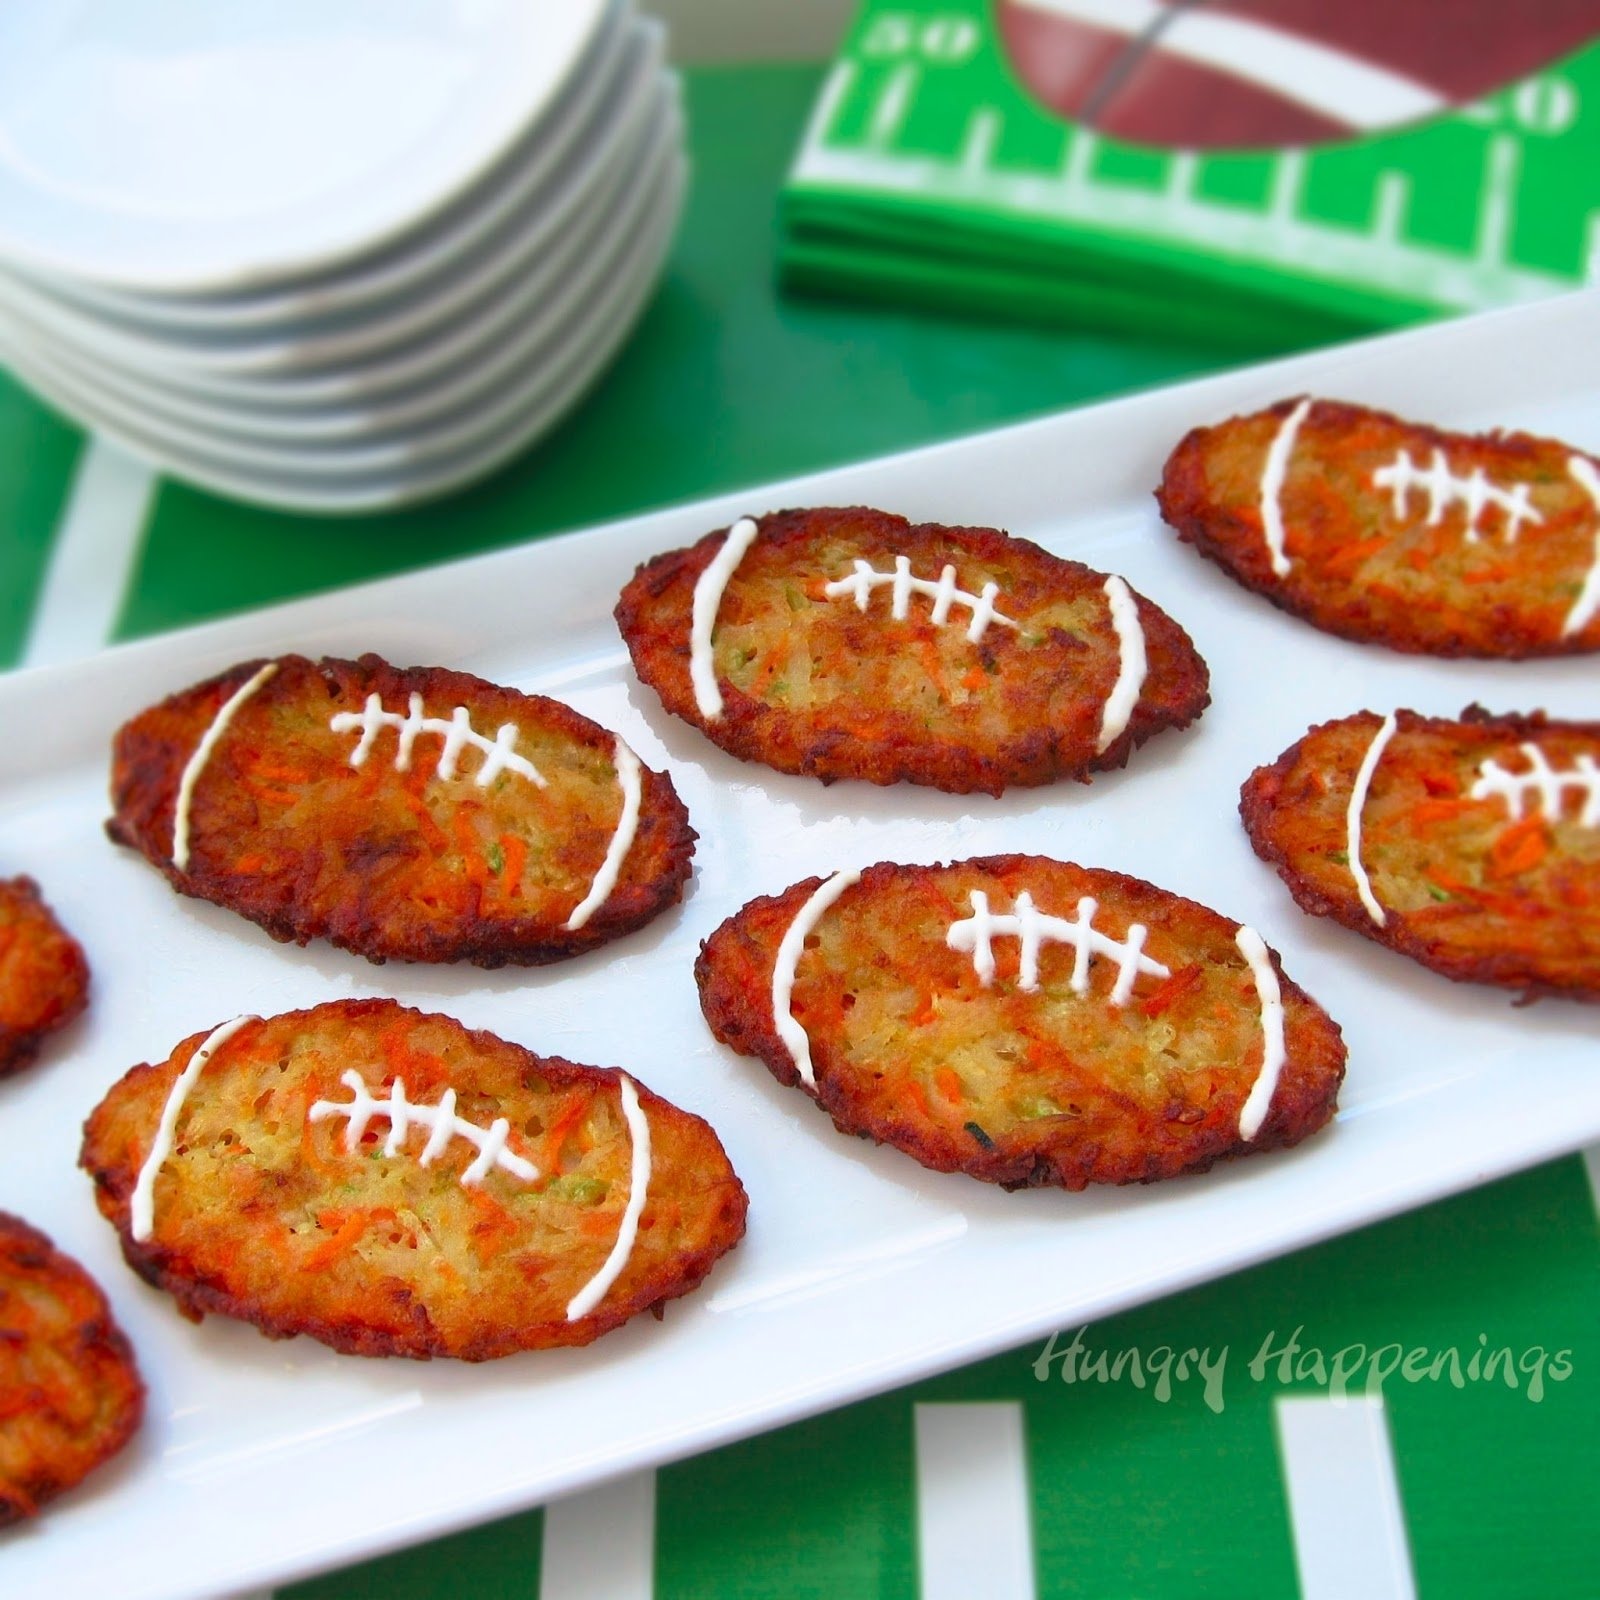 10 Spectacular Super Bowl Party Food Ideas football shaped zucchini fritters aka mucver fun super bowl 1 2022